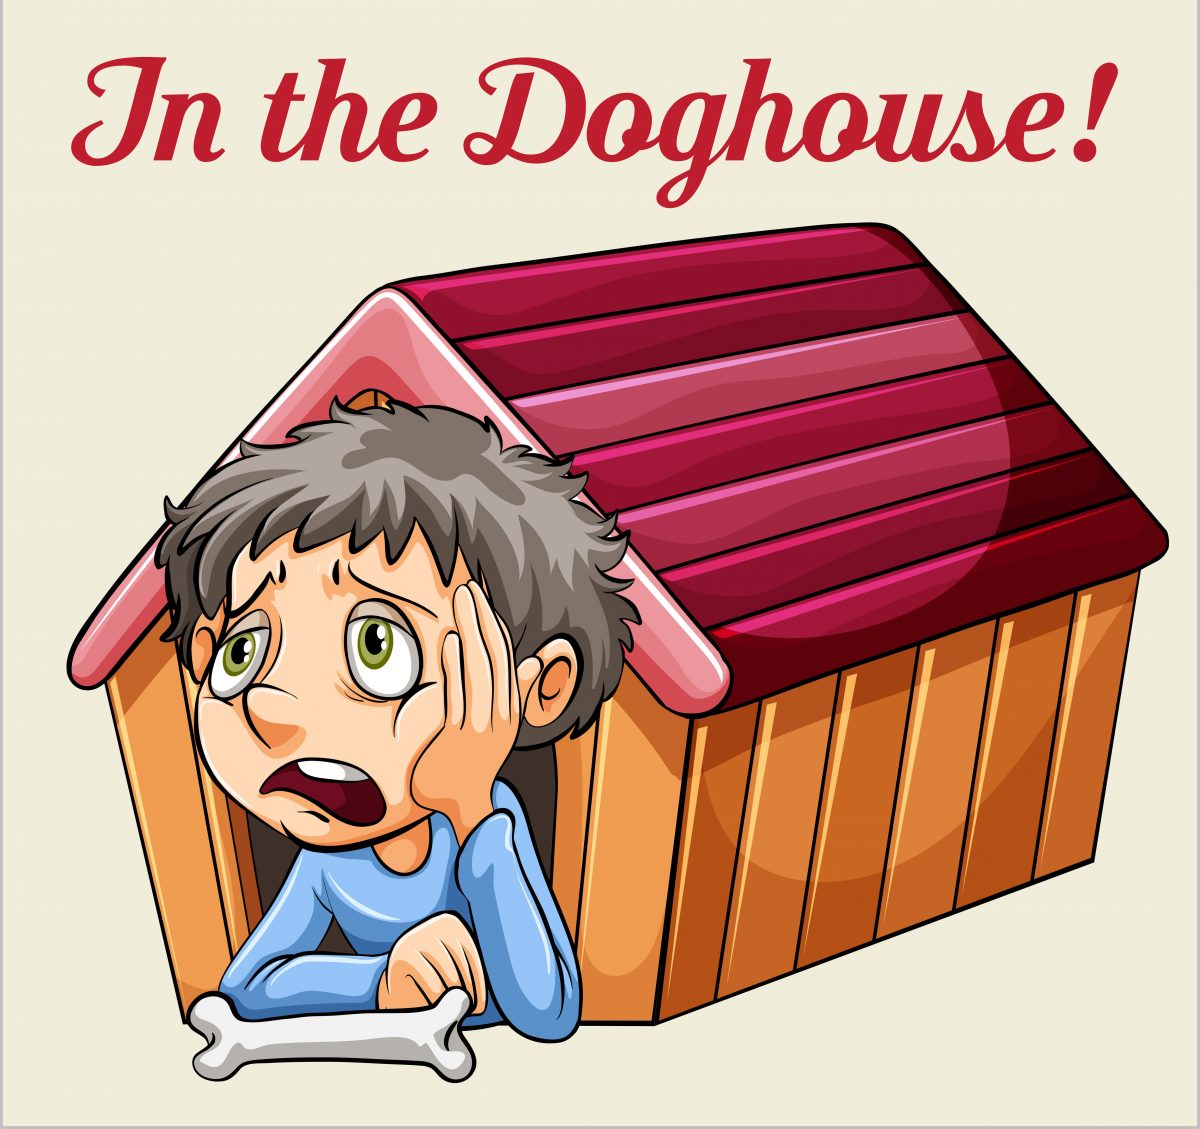 Anglické idiomy - In the Doghouse